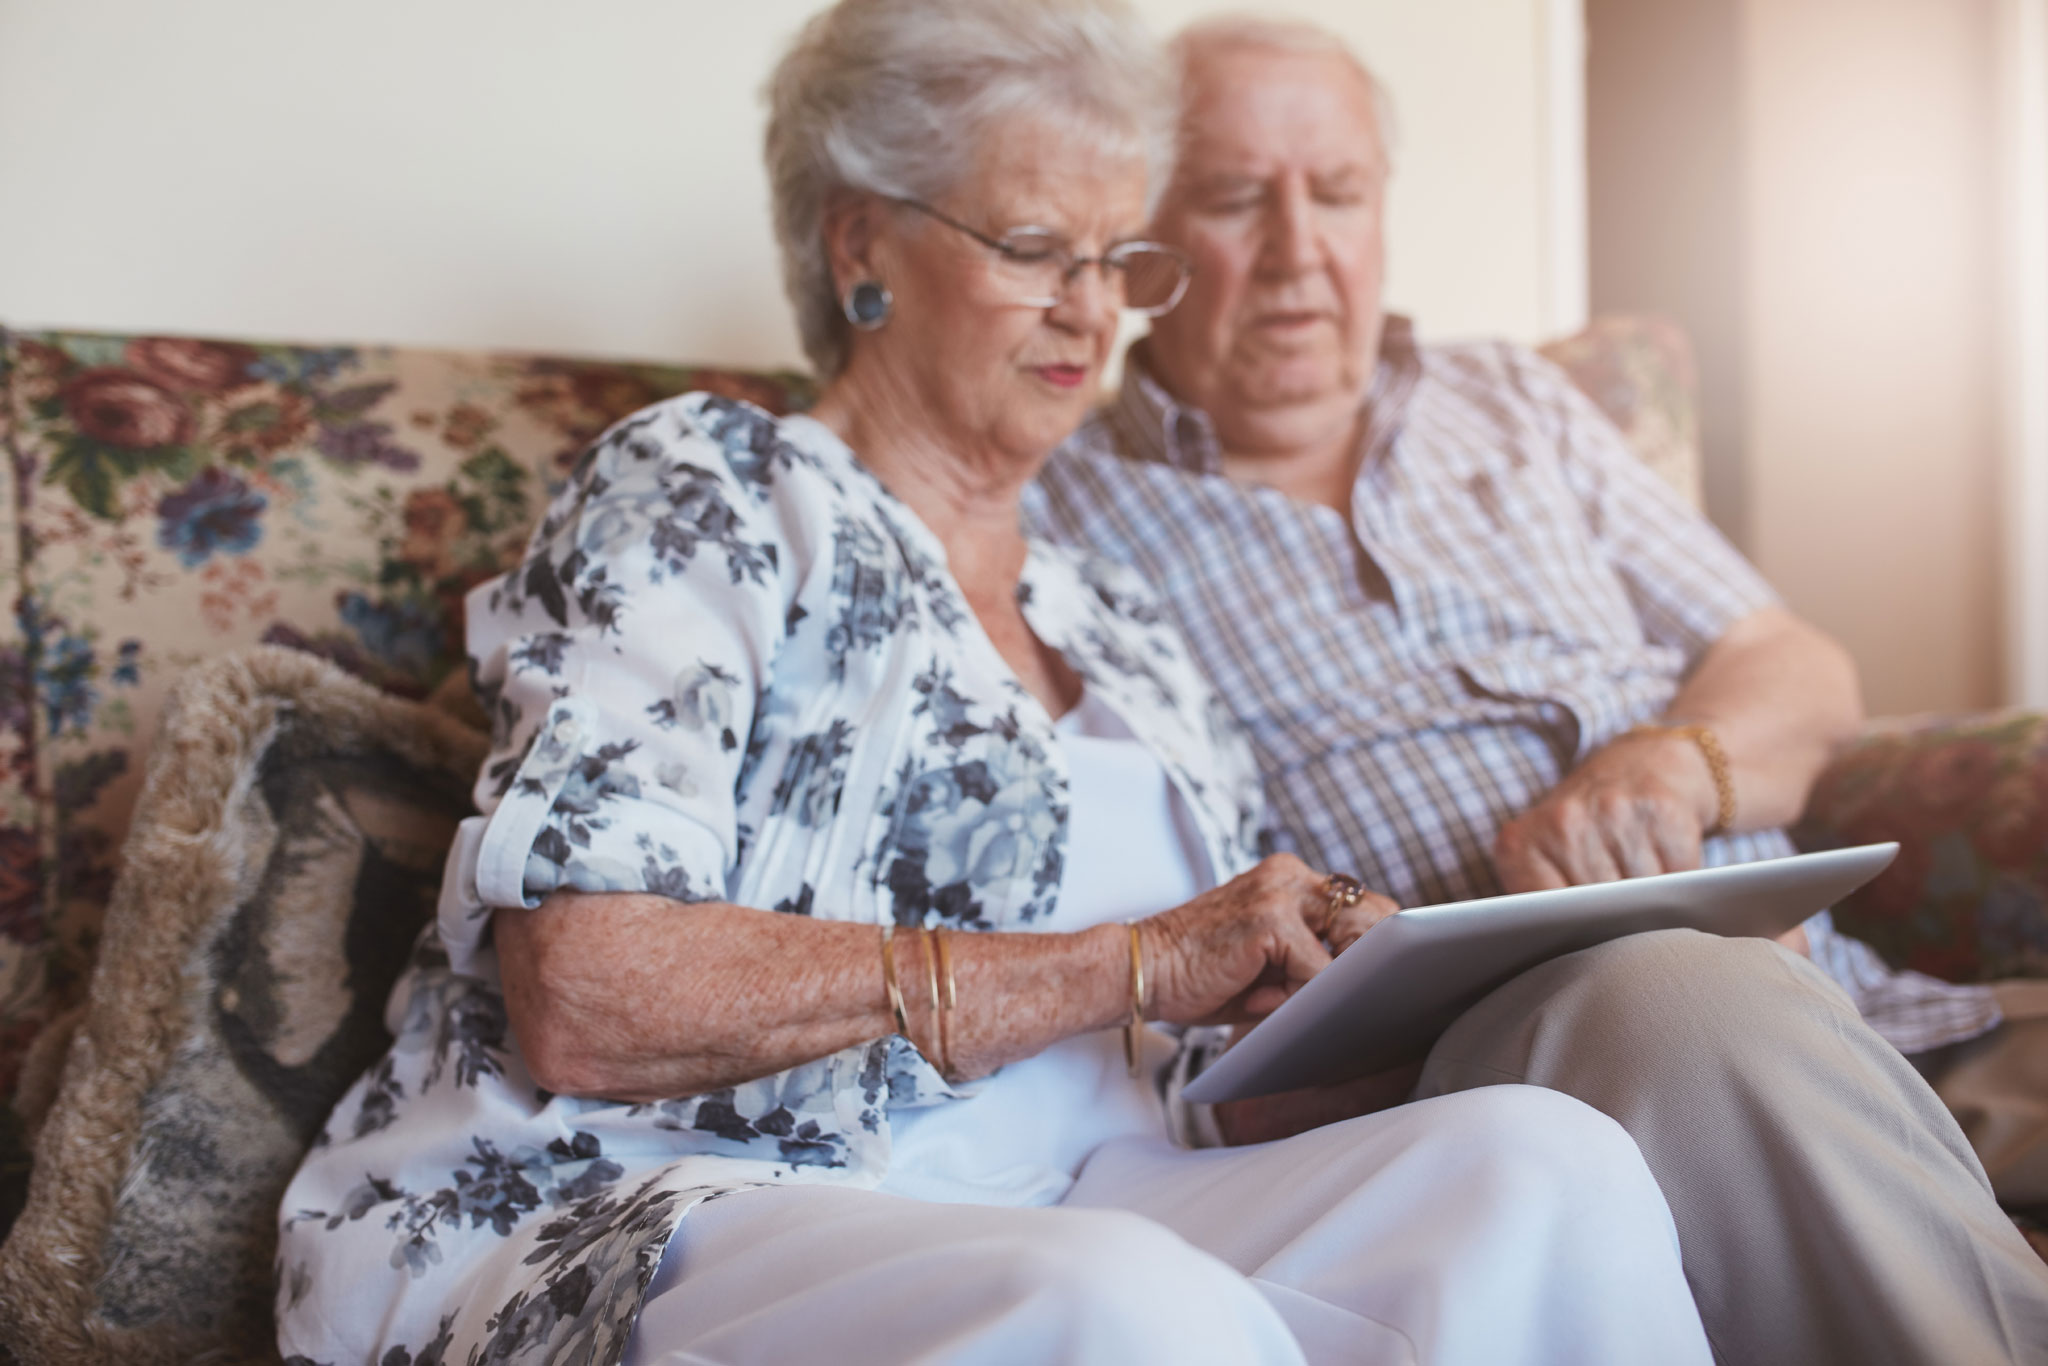 Couple looking up information on touchpad